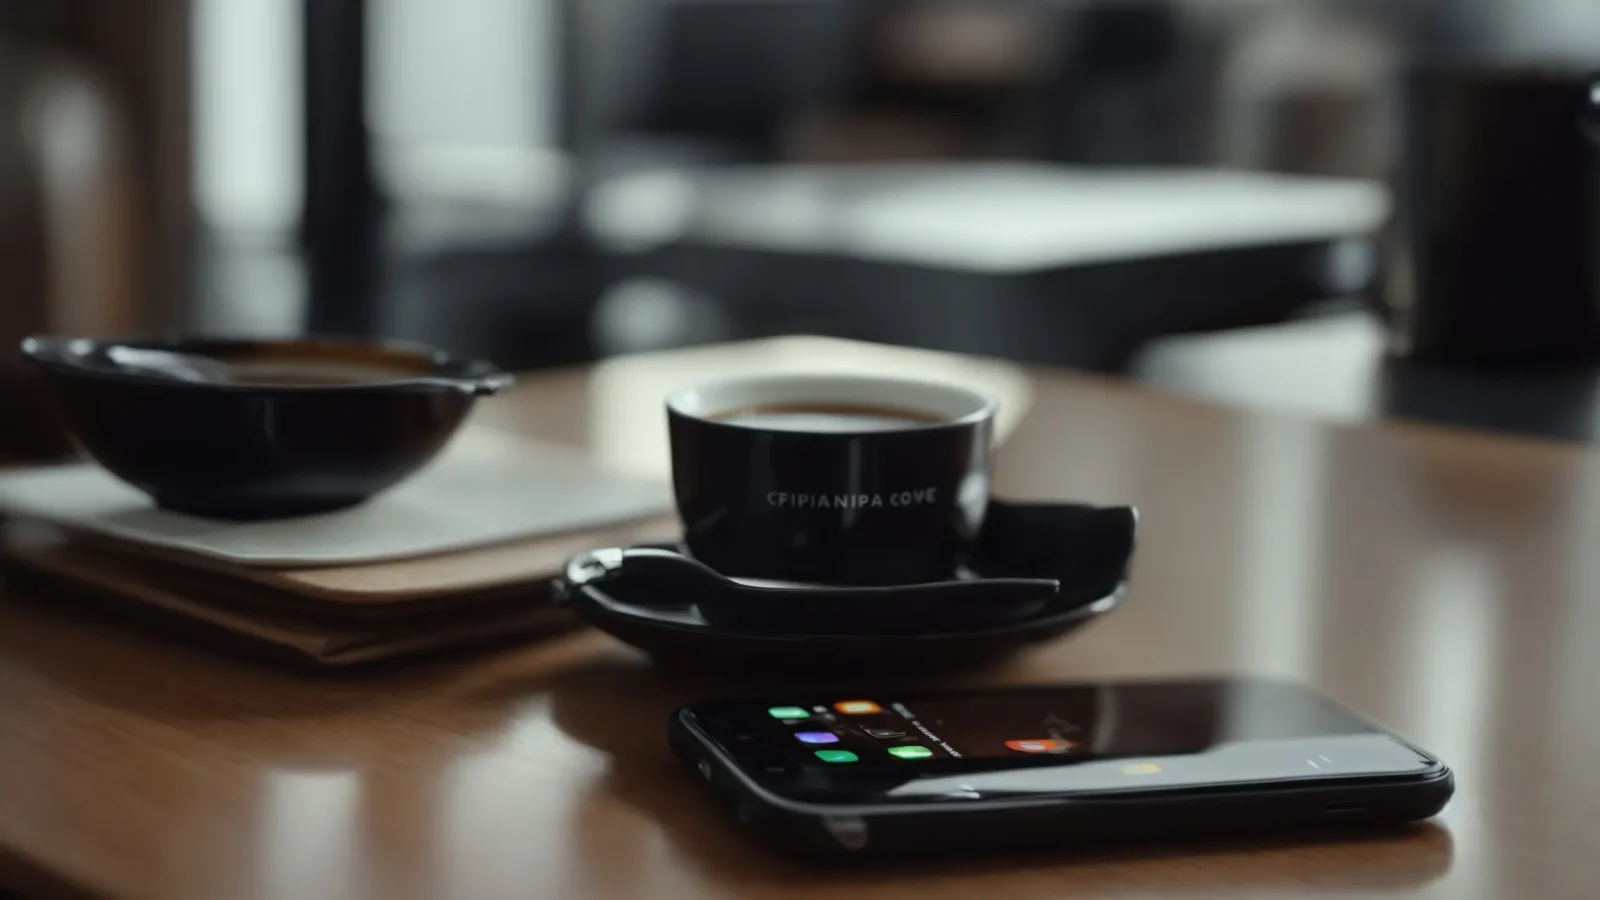 a close-up of a smartphone laying on a desk next to a cup of coffee, displaying a search engine on its screen.